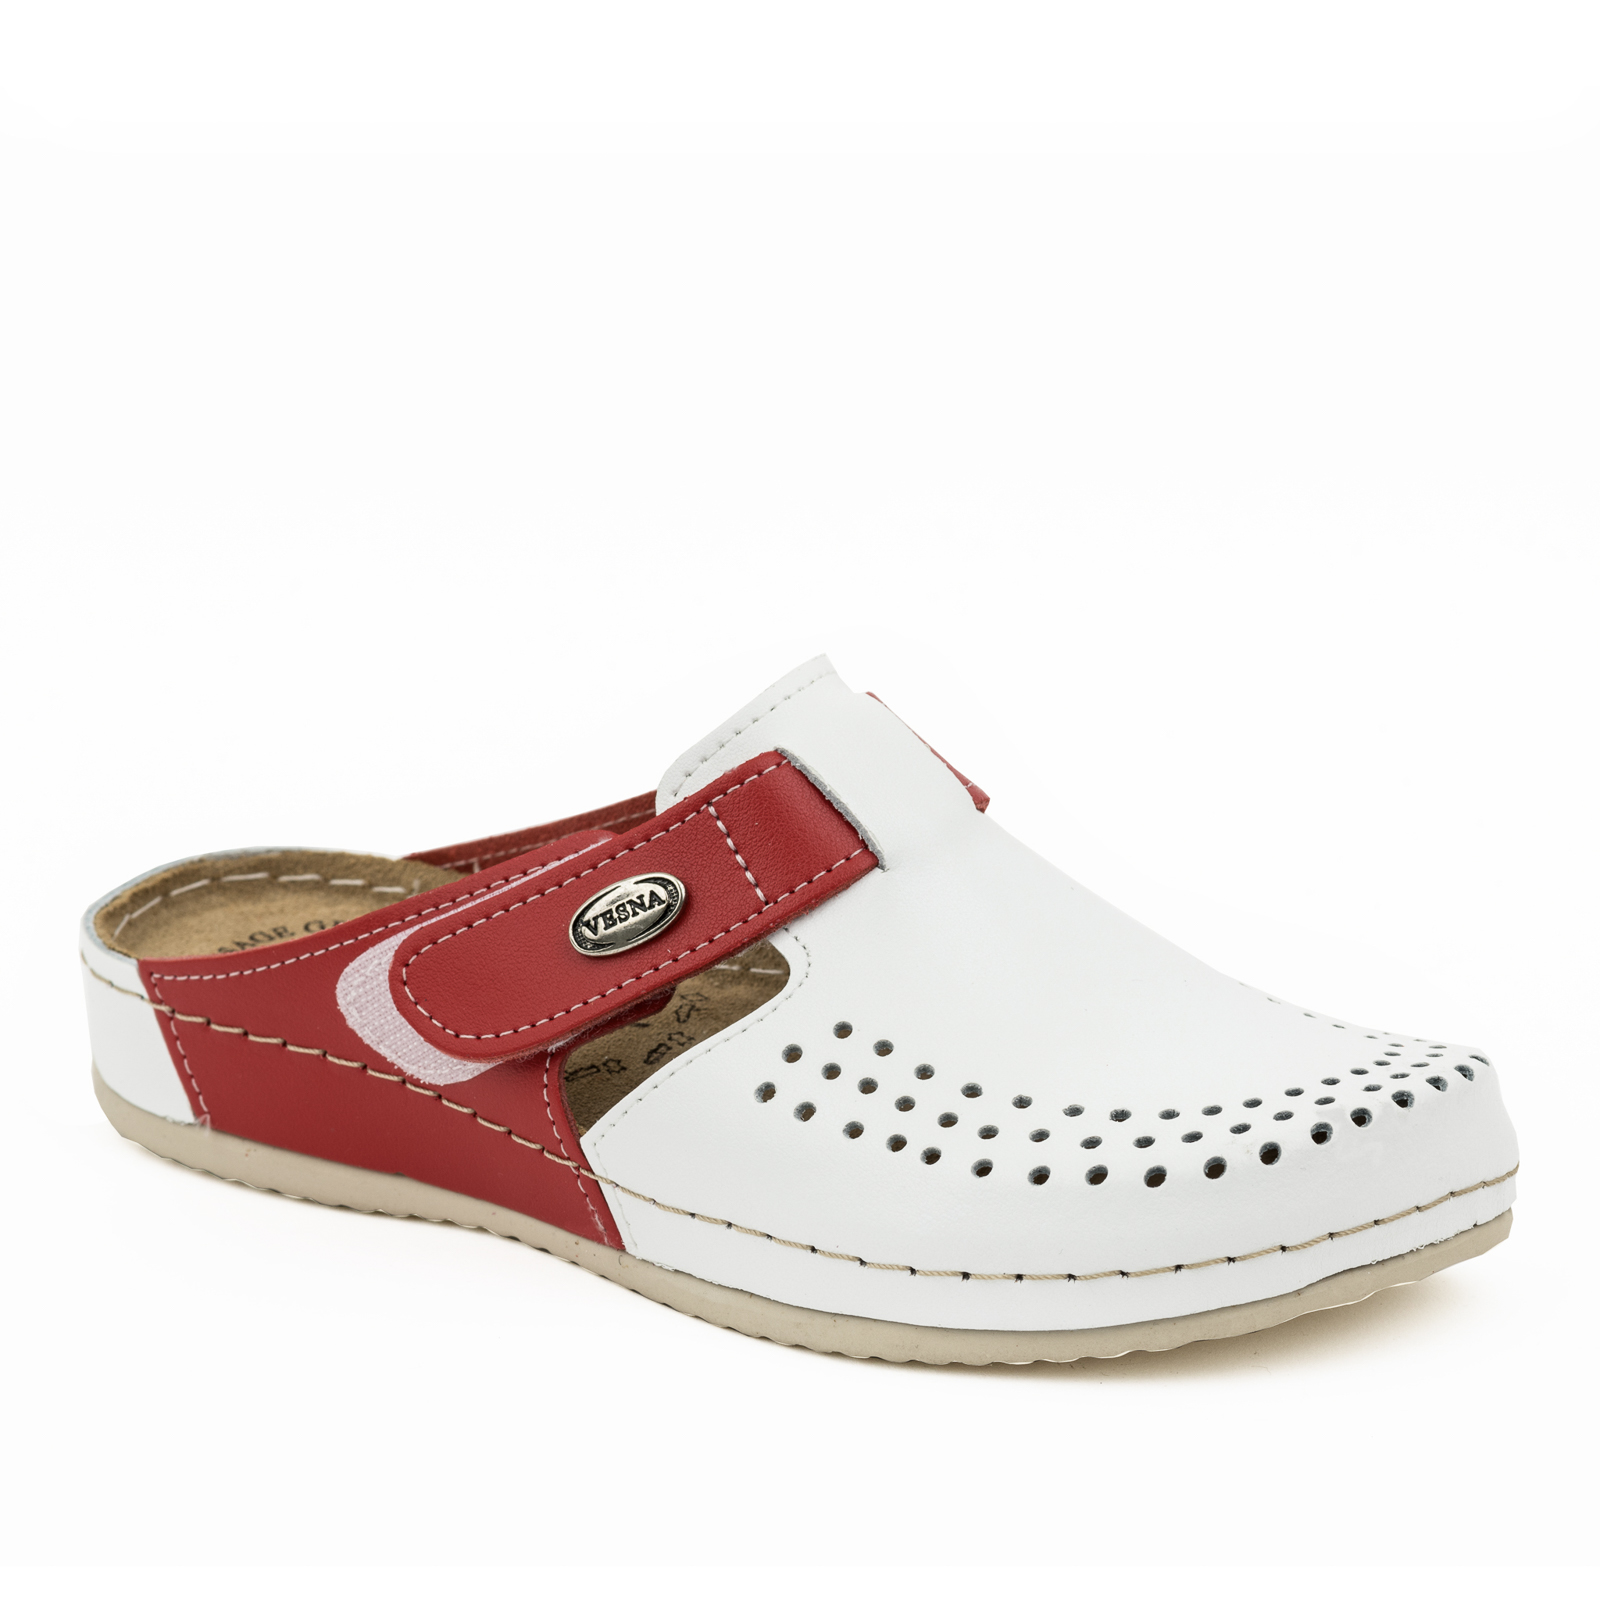 ANATOMIC LEATHER  CLOGS WITH VELCRO BAND - RED/WHITE